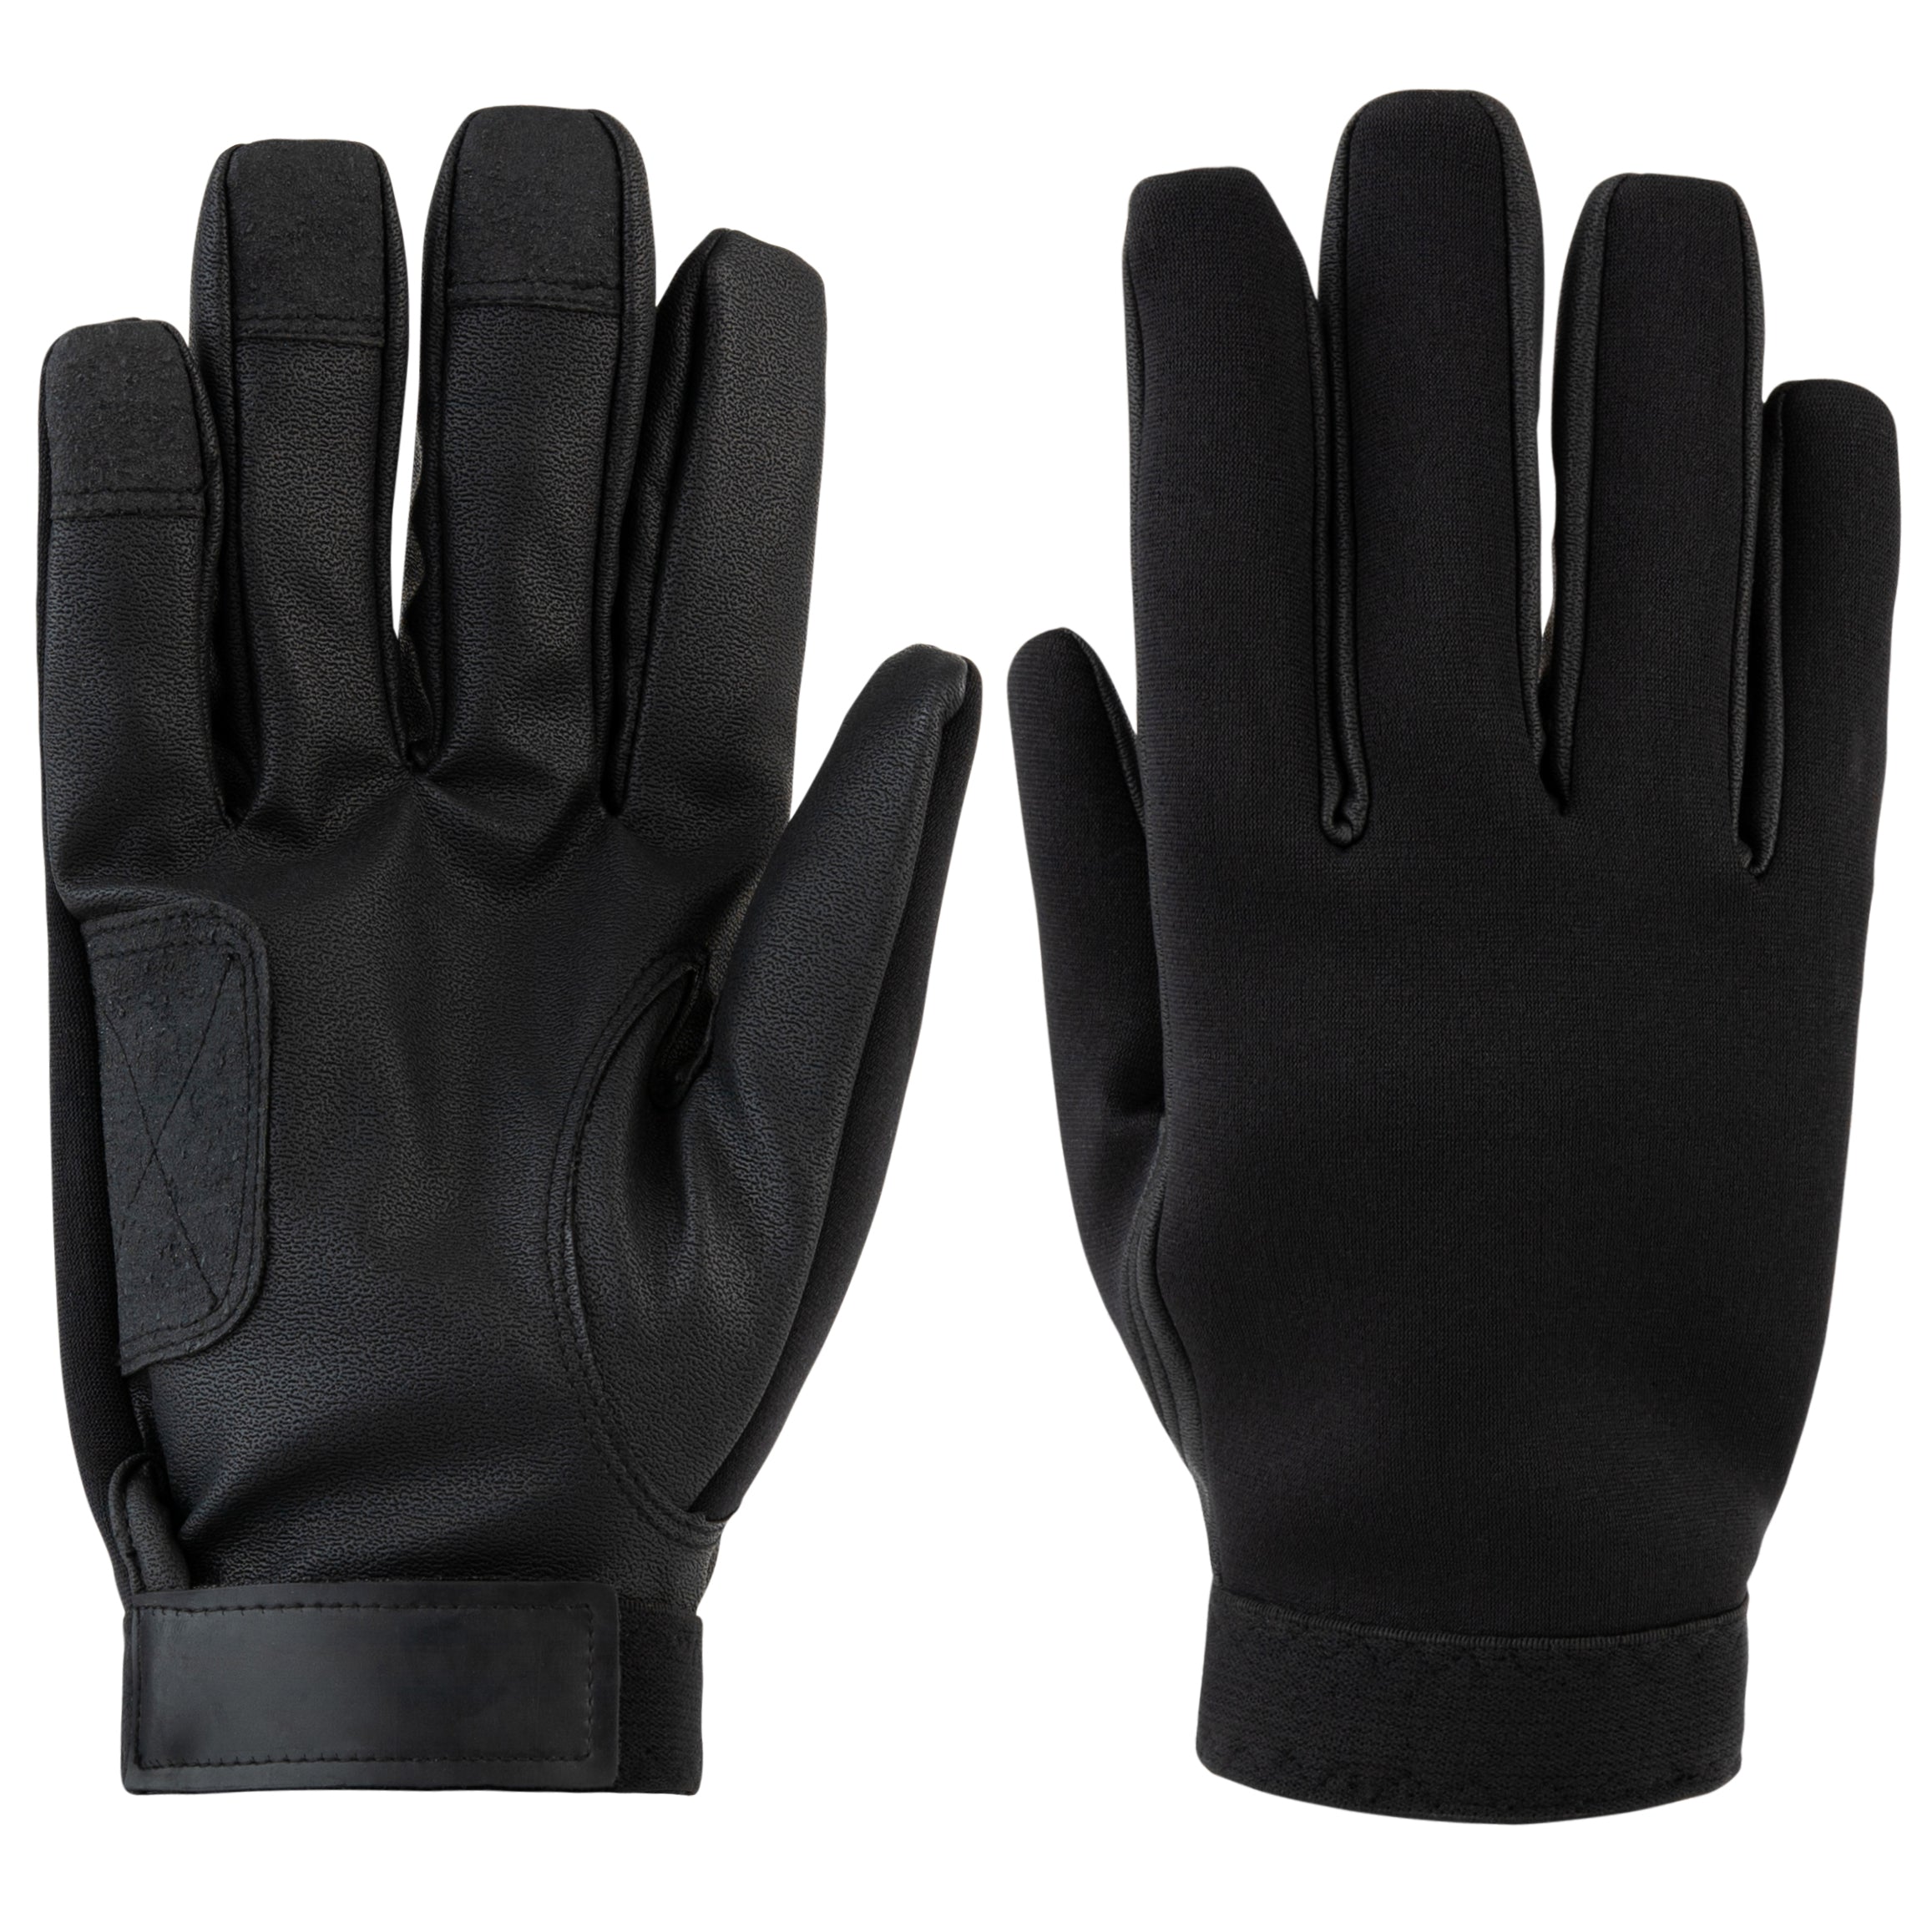 Neoprene Duty Glove Thinsulate Lined – GFP Gloves- Finger Fashions